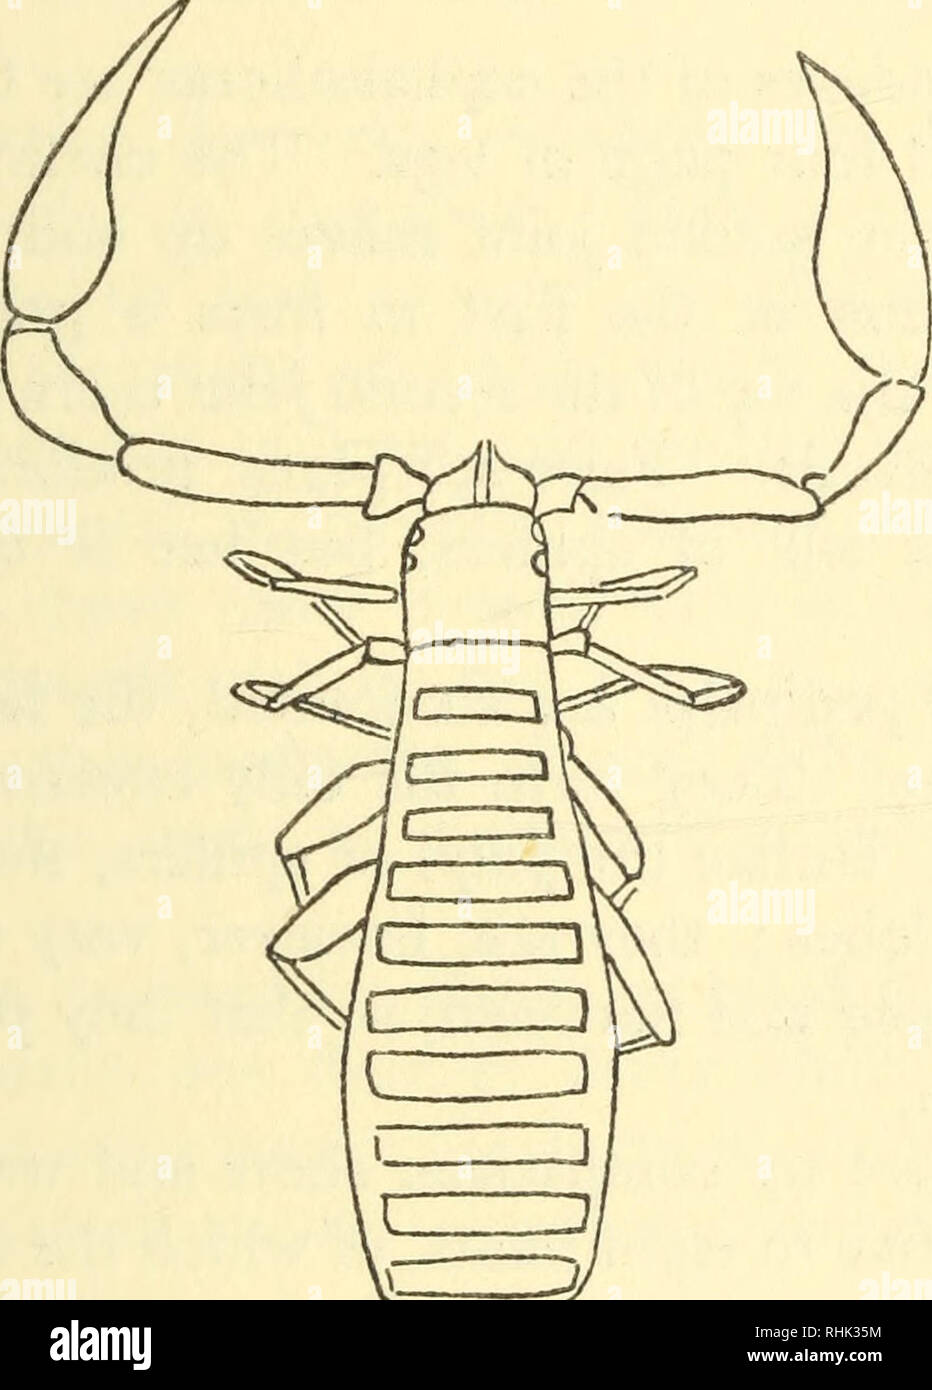 A)Sketch of a spider leg showing all segments: joints without